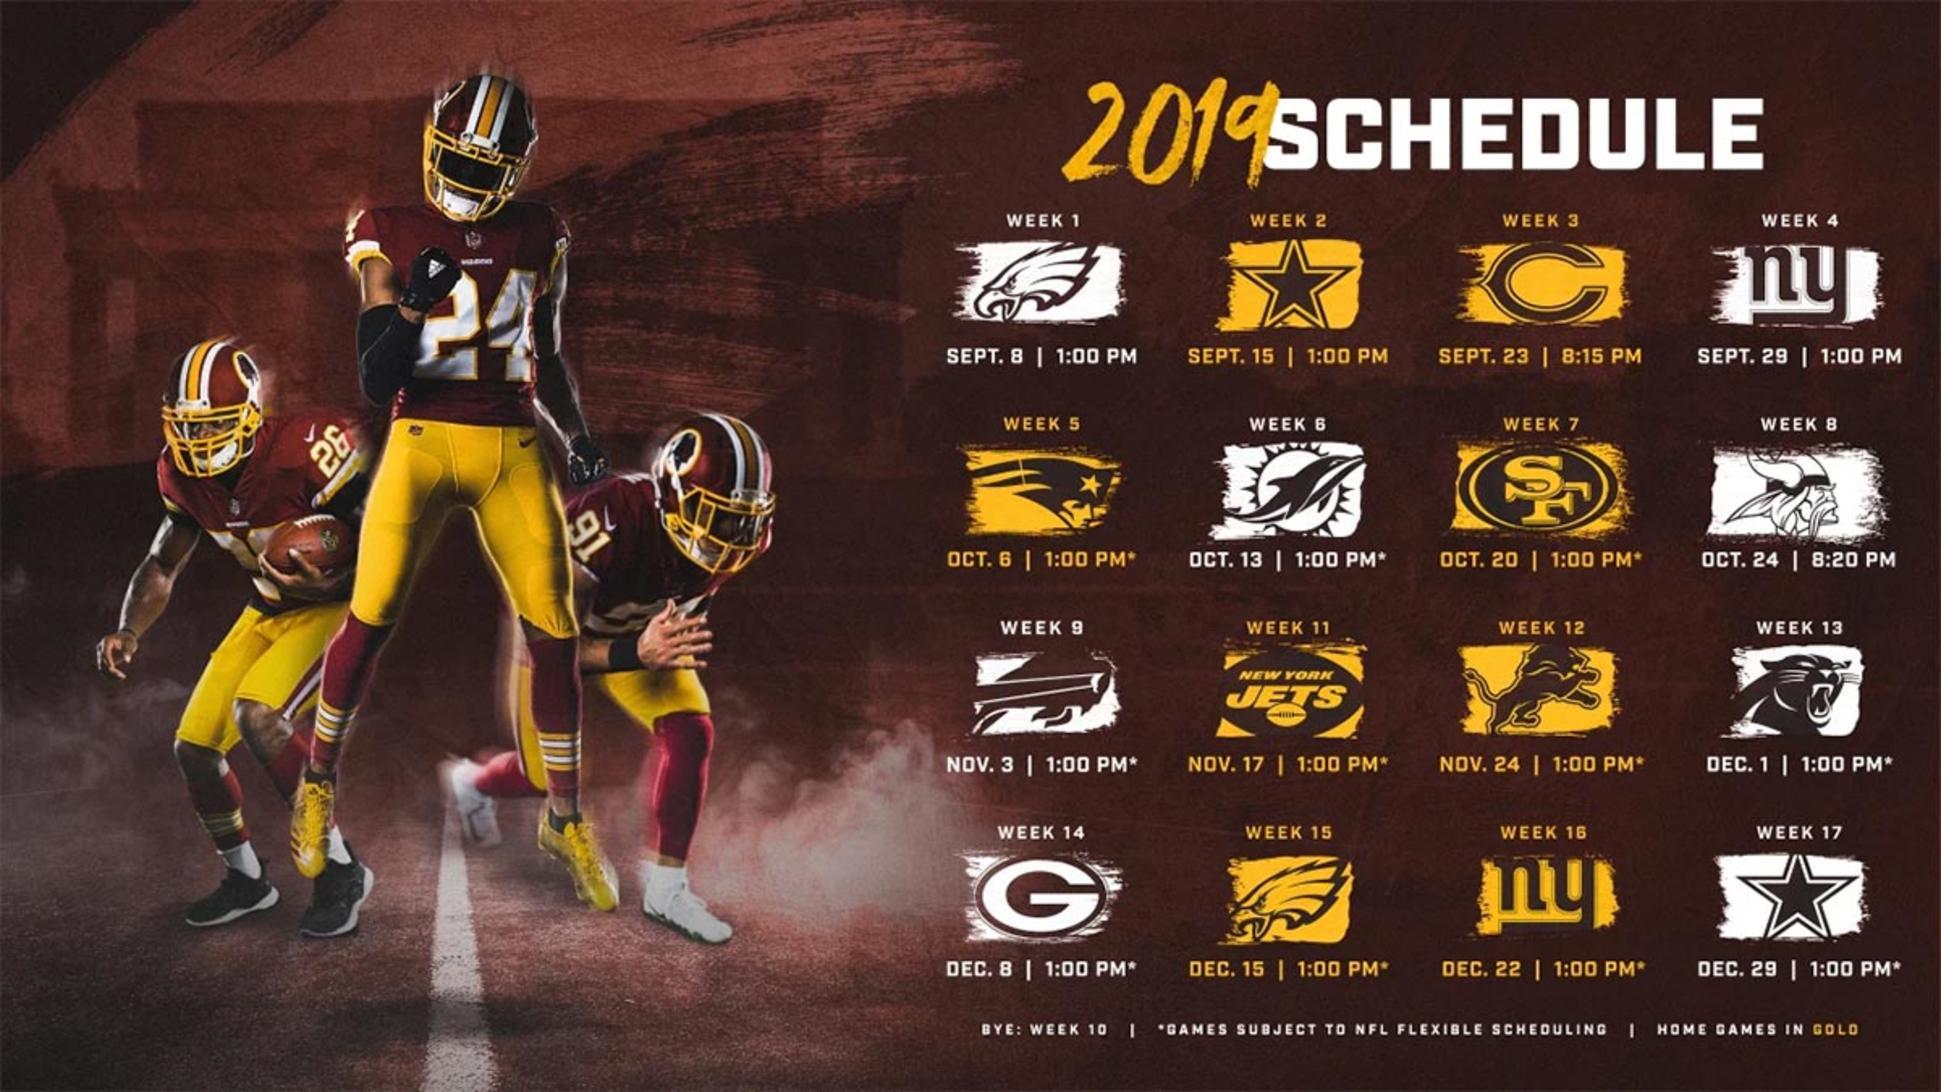 Redskins' 2019 Schedule Includes 2 Prime Time Games